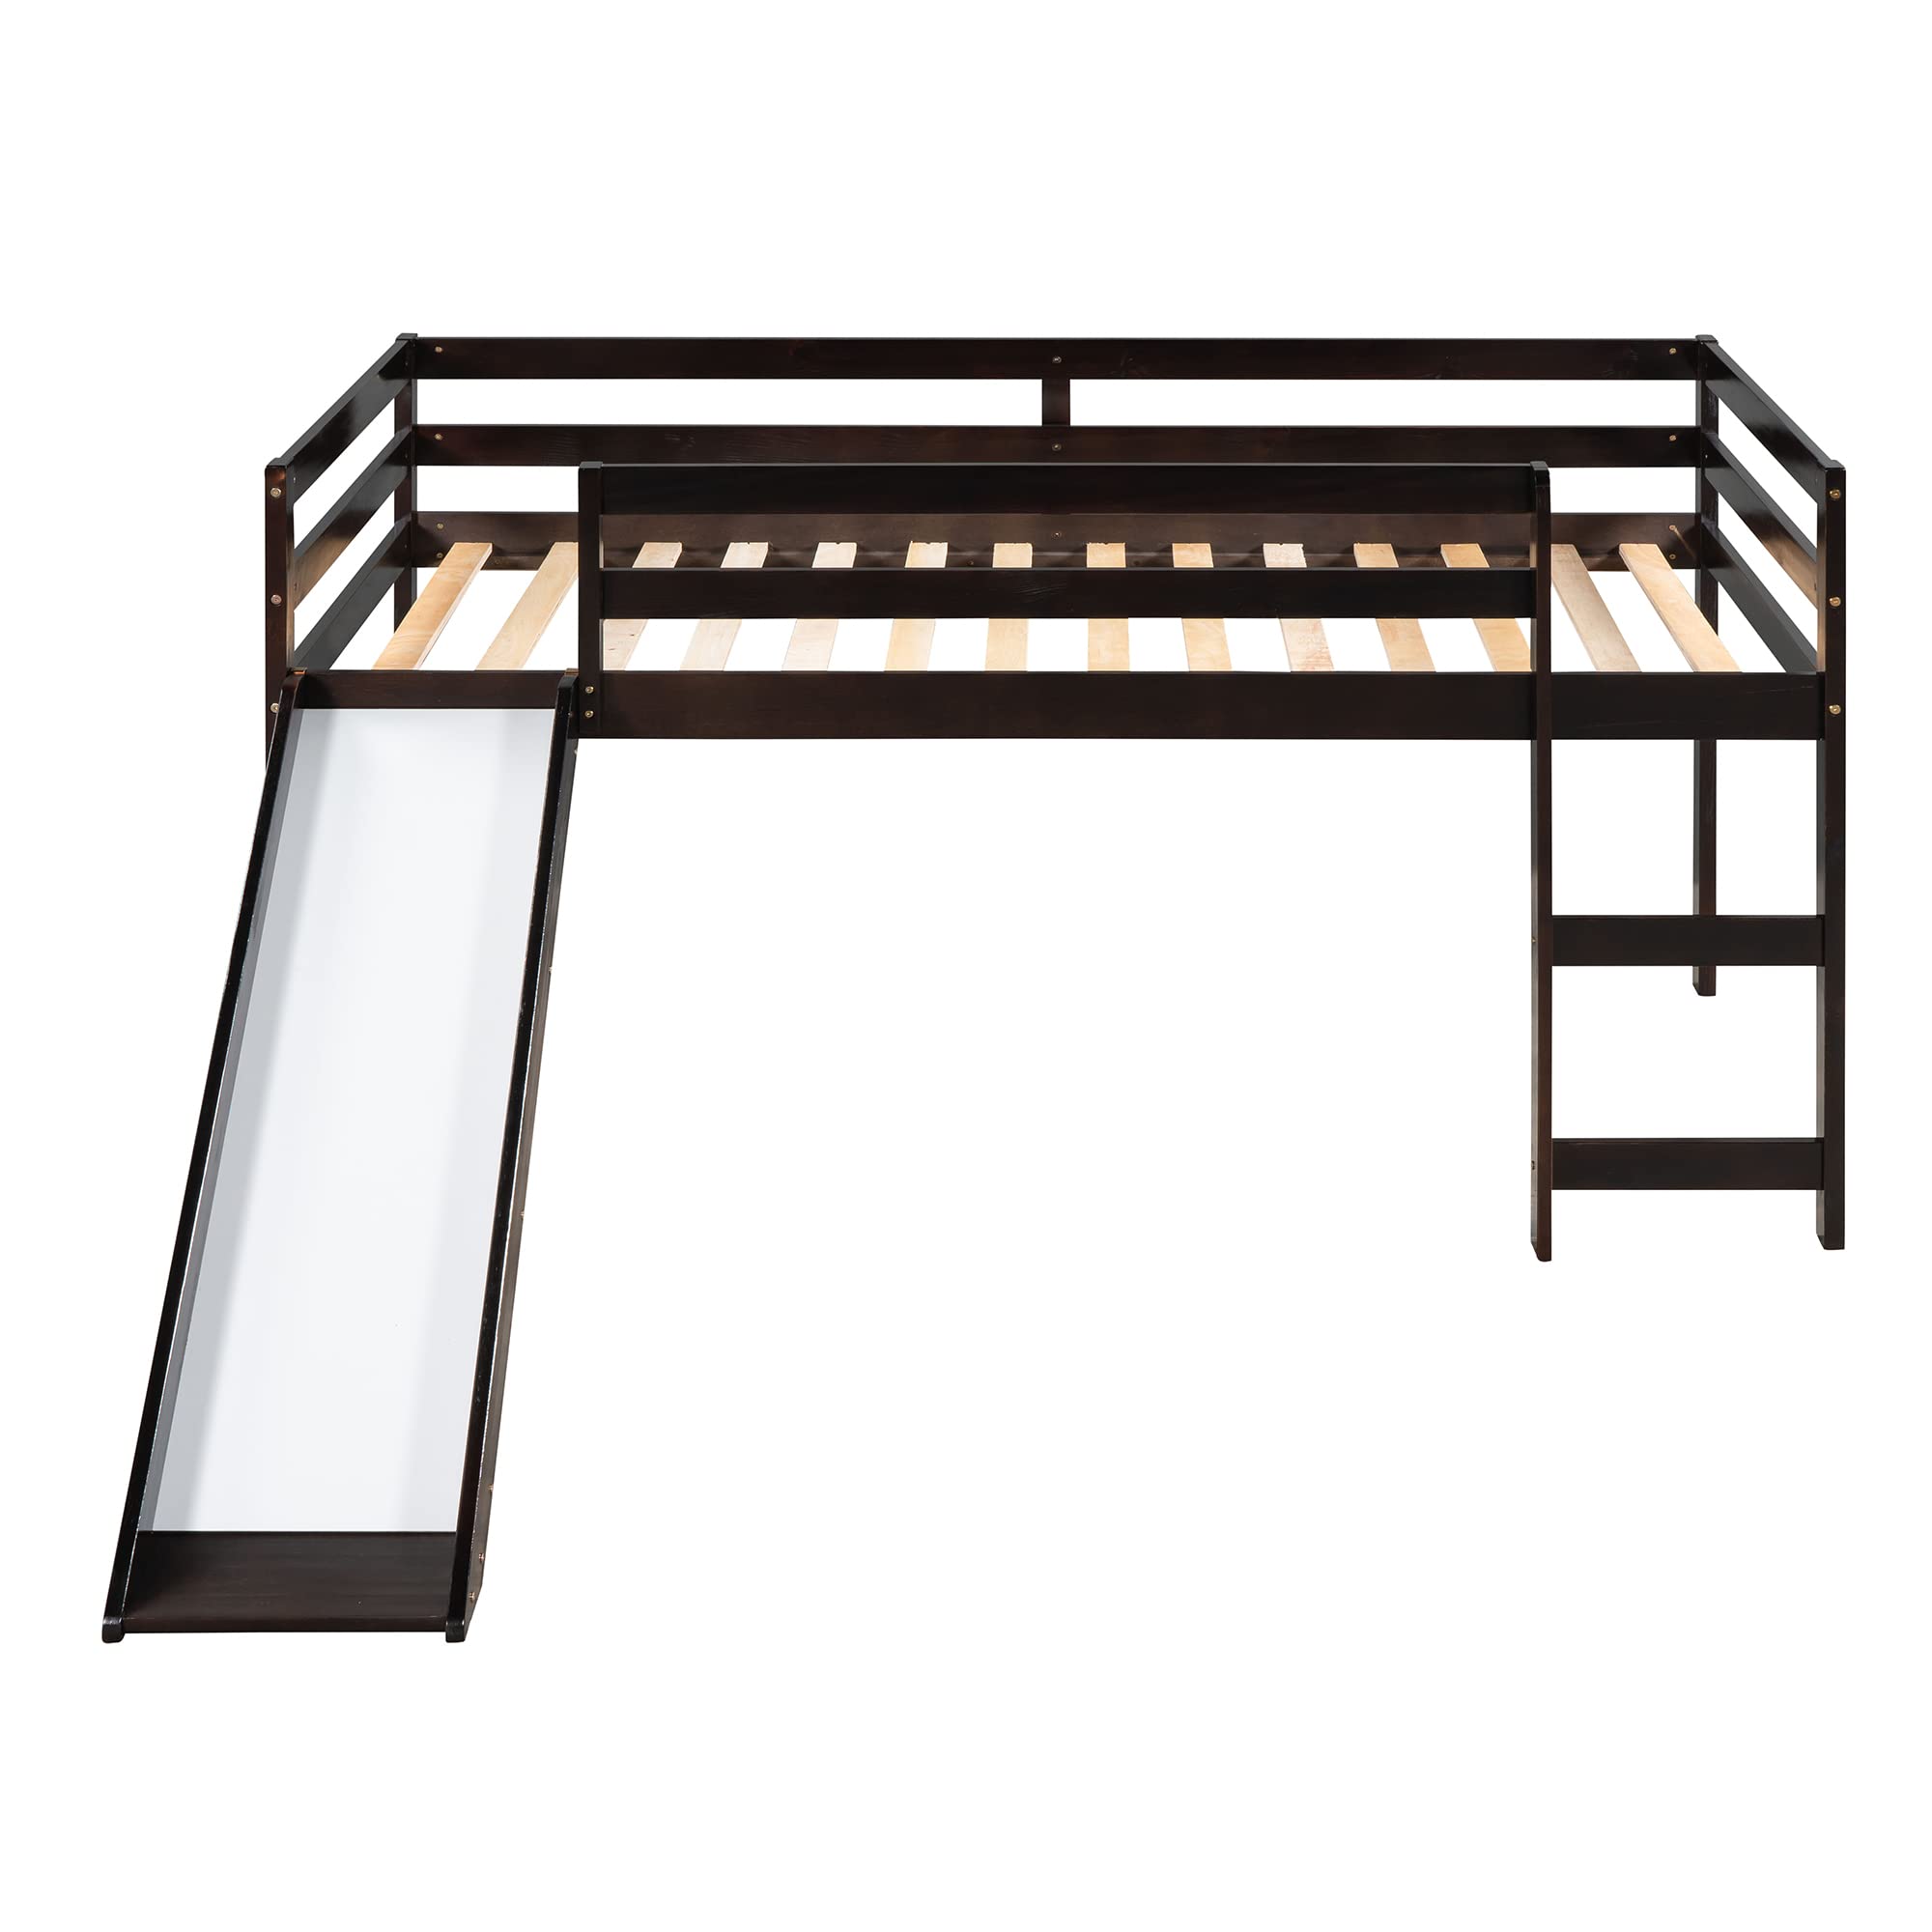 Lostcat Twin Loft Bed with Slide, Low Loft Bed with Stairs and Chalkboard, Wood Twin Bed Frame for Kids with Slide, Space-Saving Wooden Child Bed Frame for Boys or Girls, Espresso - Lostcat